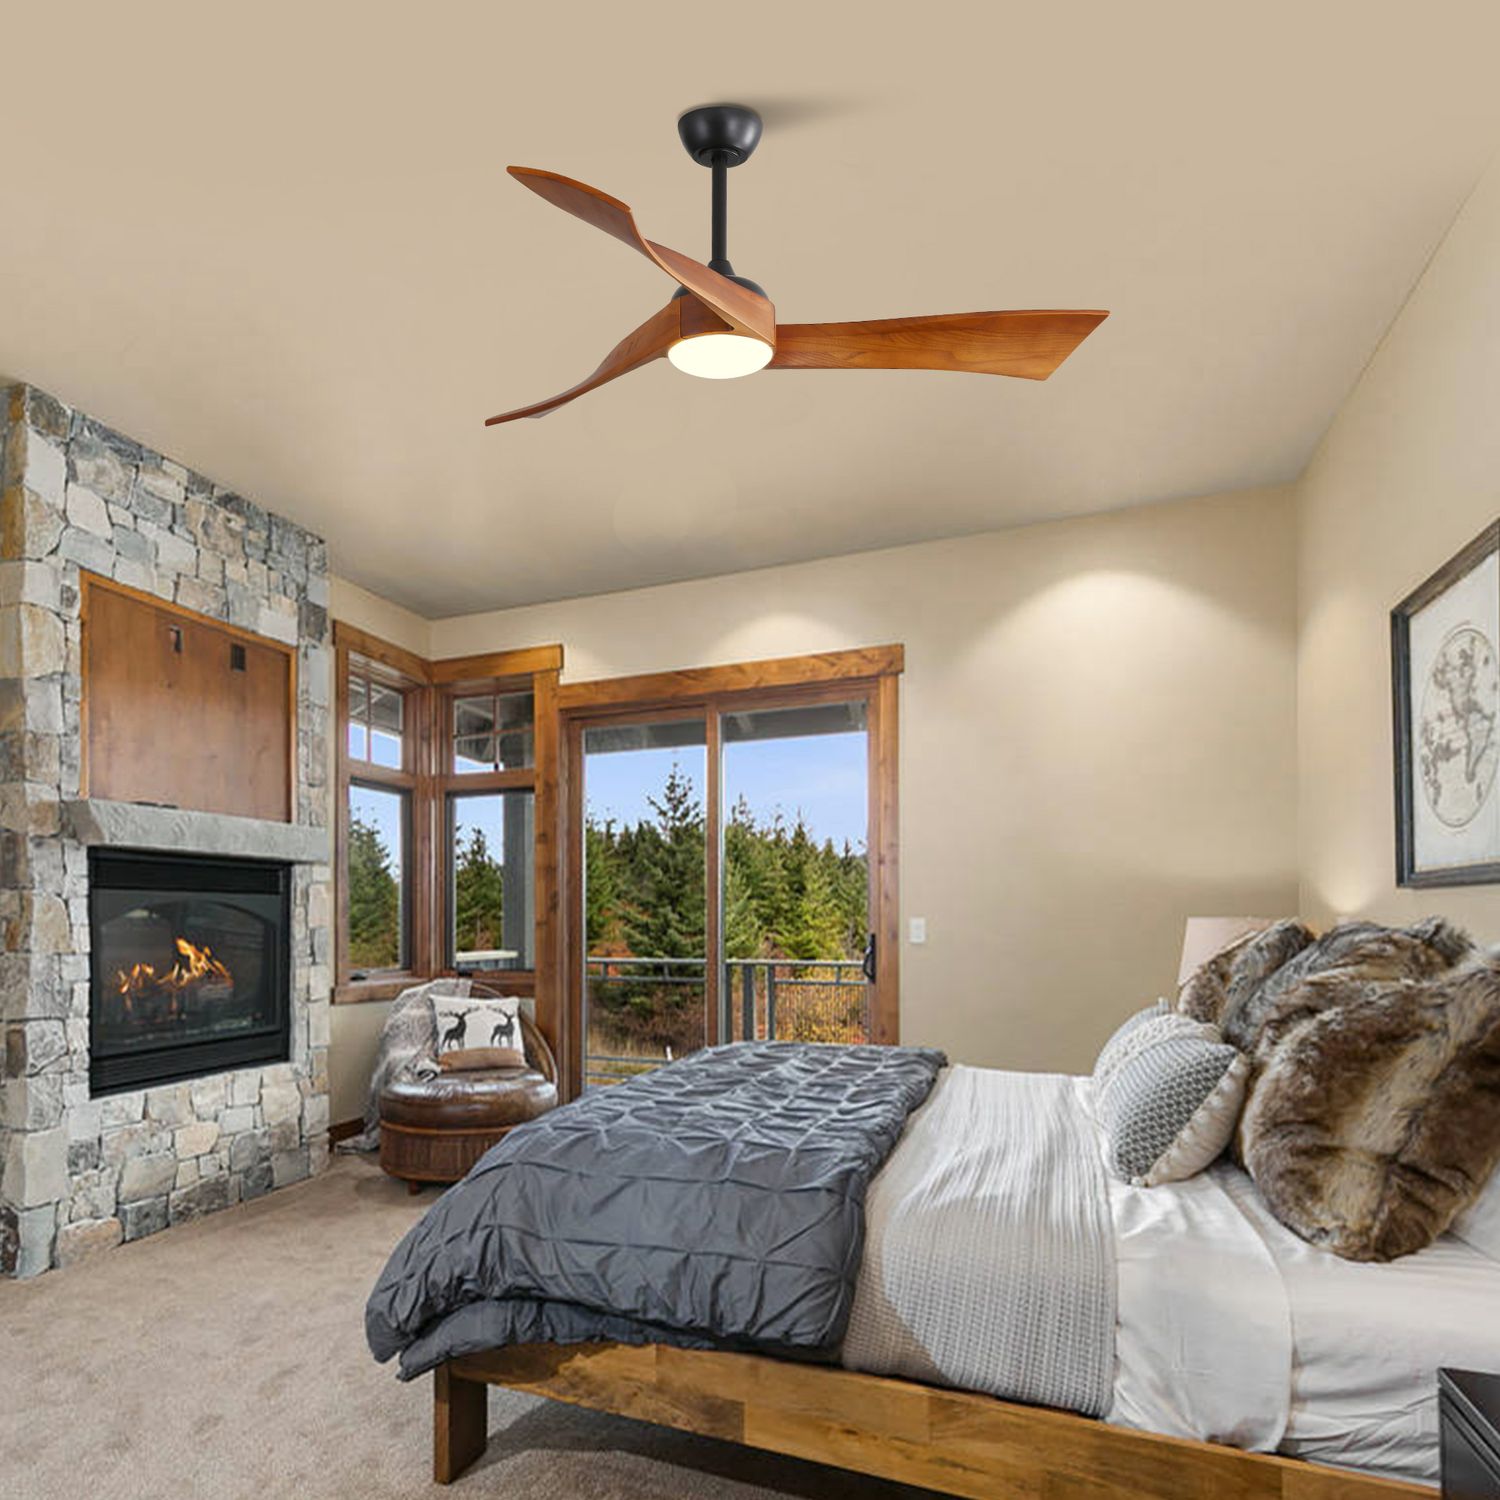 KBS Solid Wood Ceiling Fan With Light for bedroom